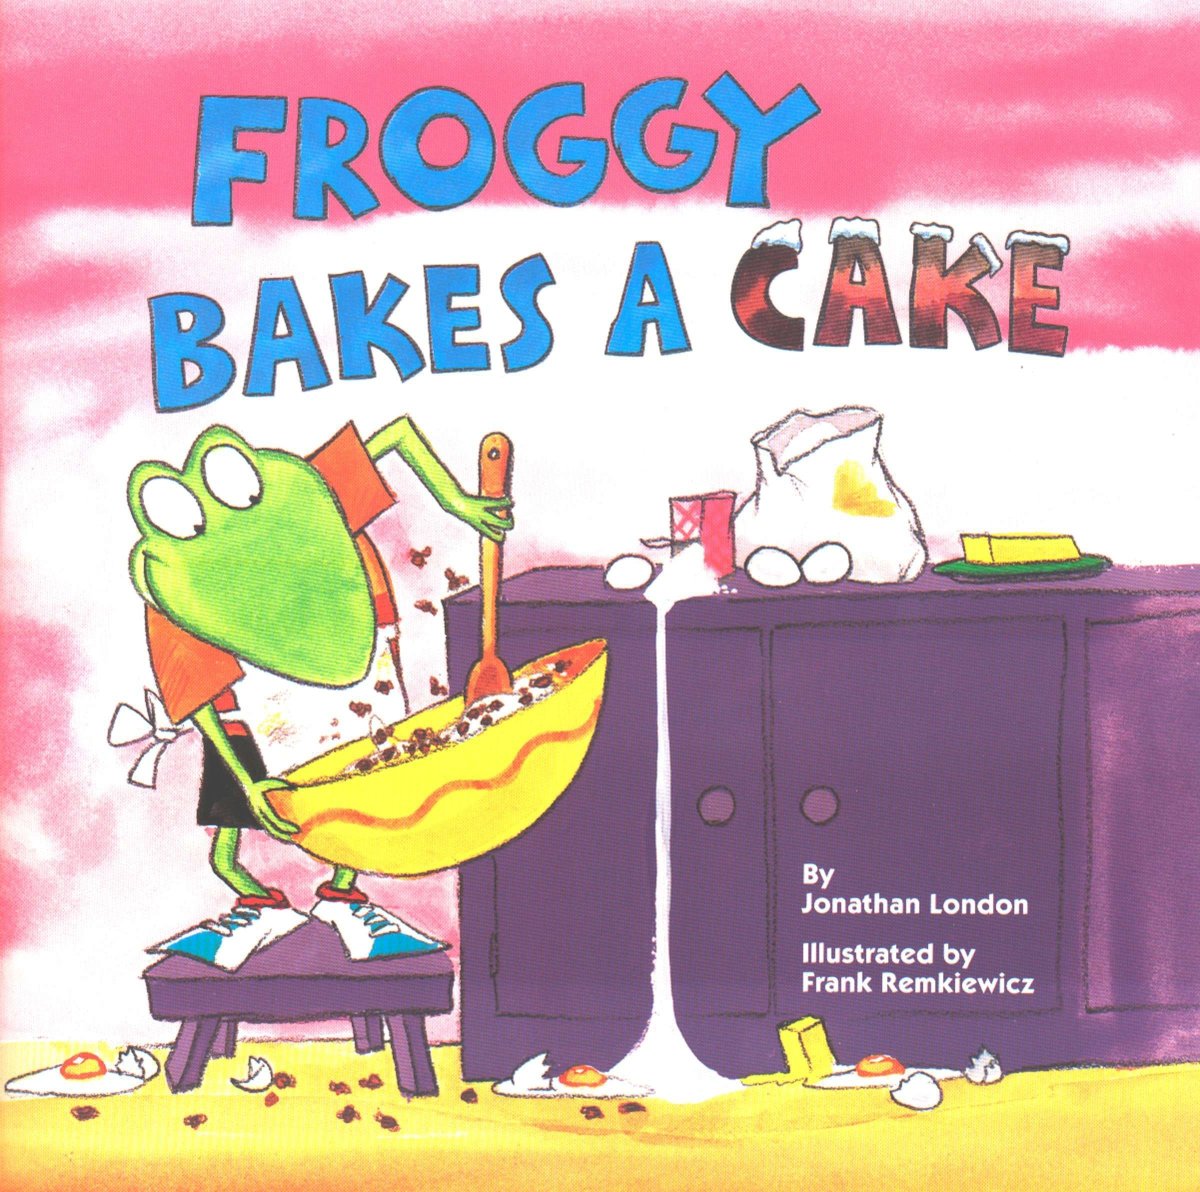 Froggy Bakes a Cake is one of 10 or more books in Jonathan London's series about Froggy.